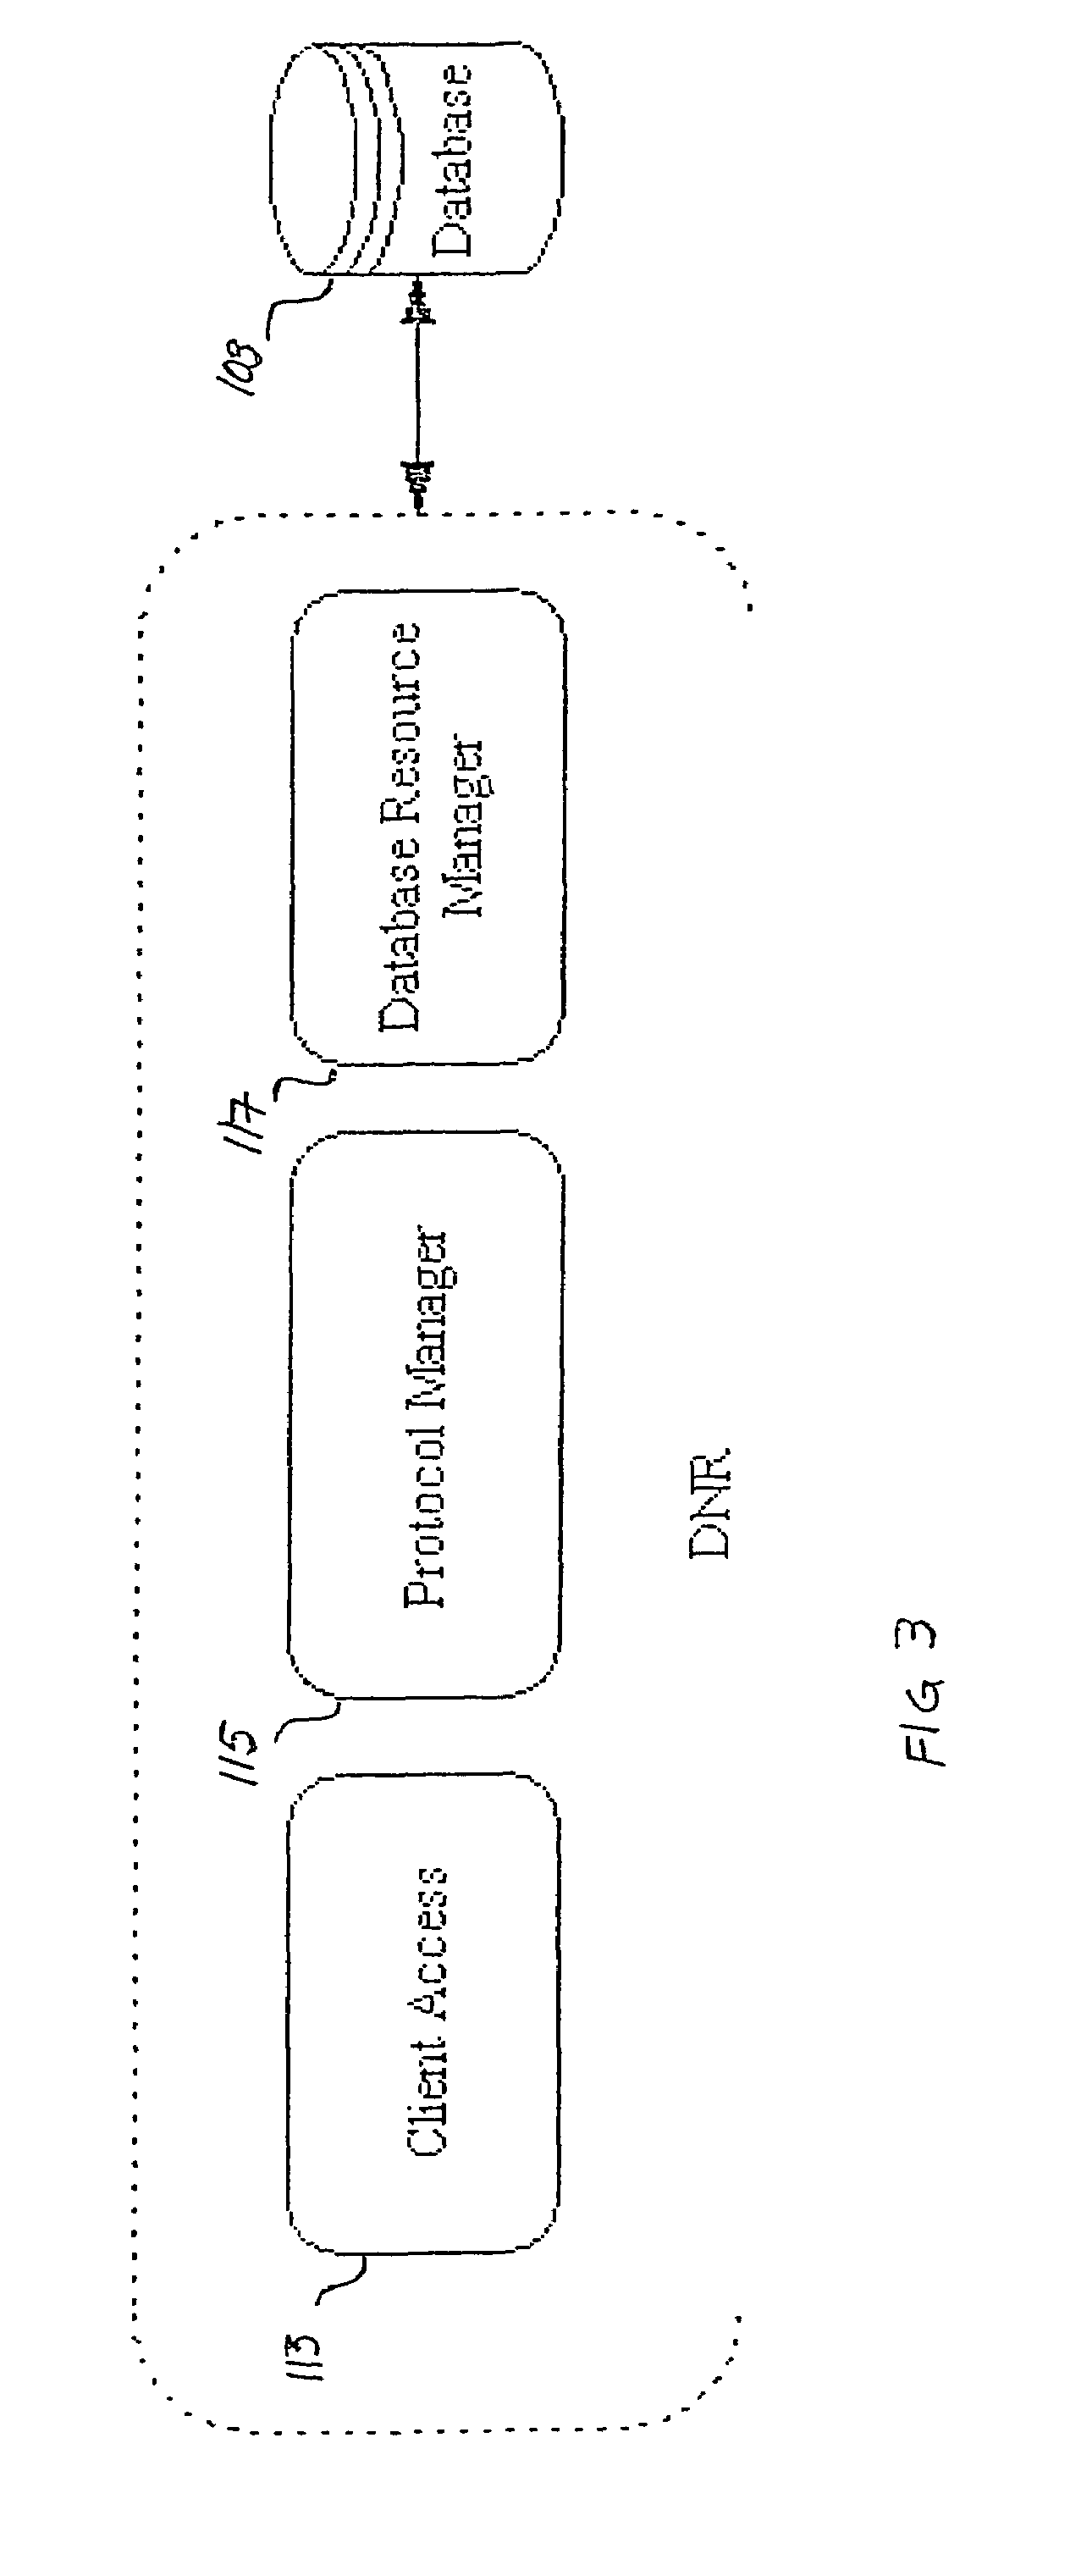 System and method for the optimization of database access in data base networks